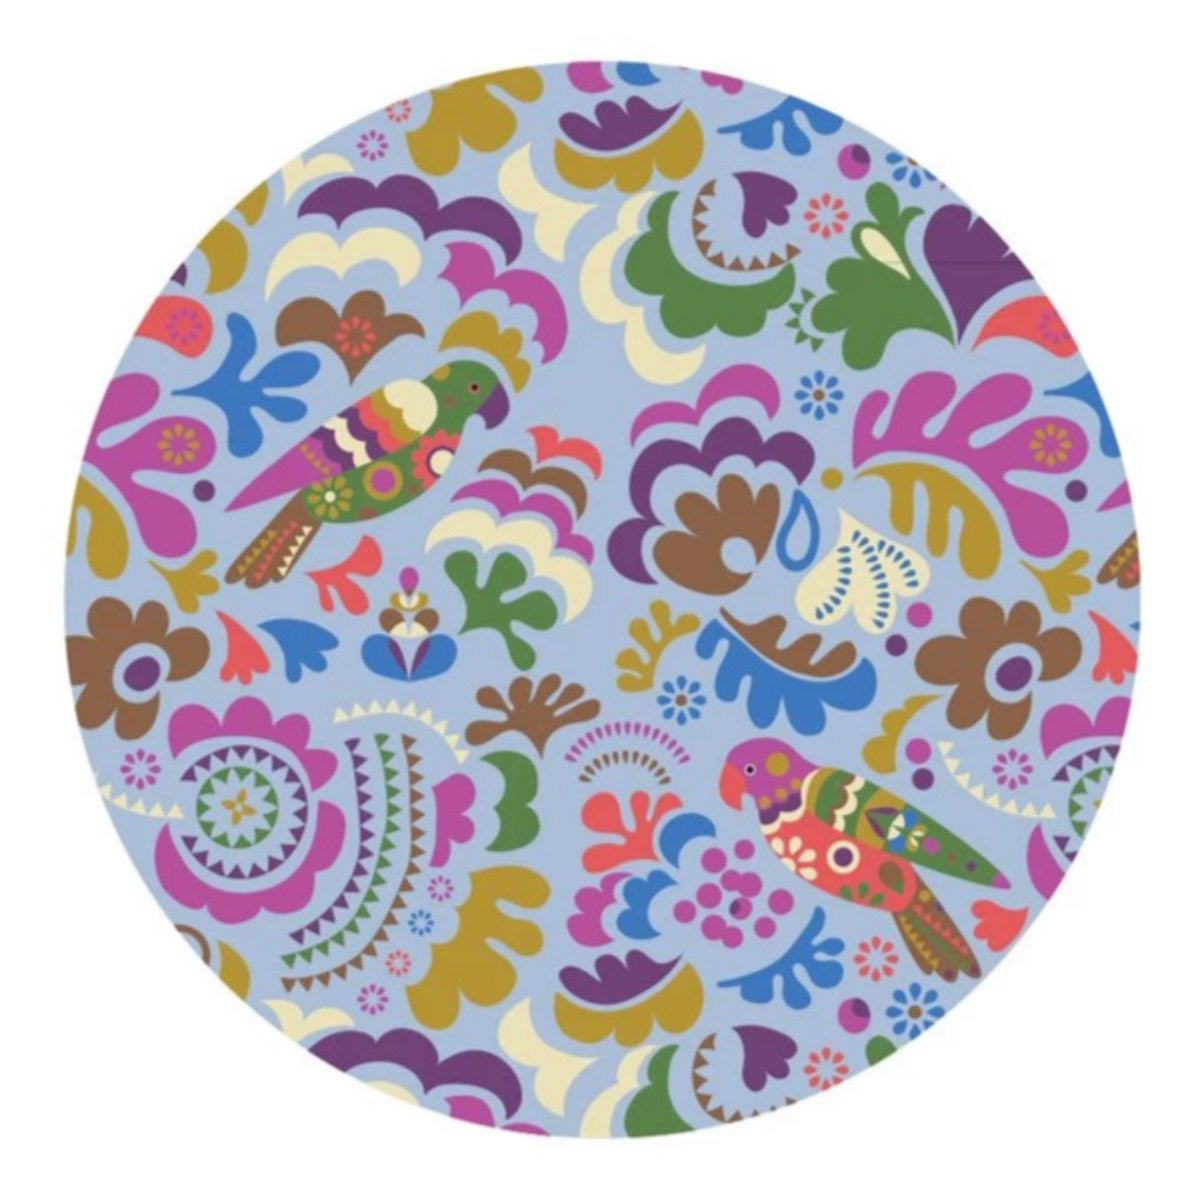 Parrot Island - SummerForever.ca Round Beach Towel with Pompoms, DIA 150 cm-59 in